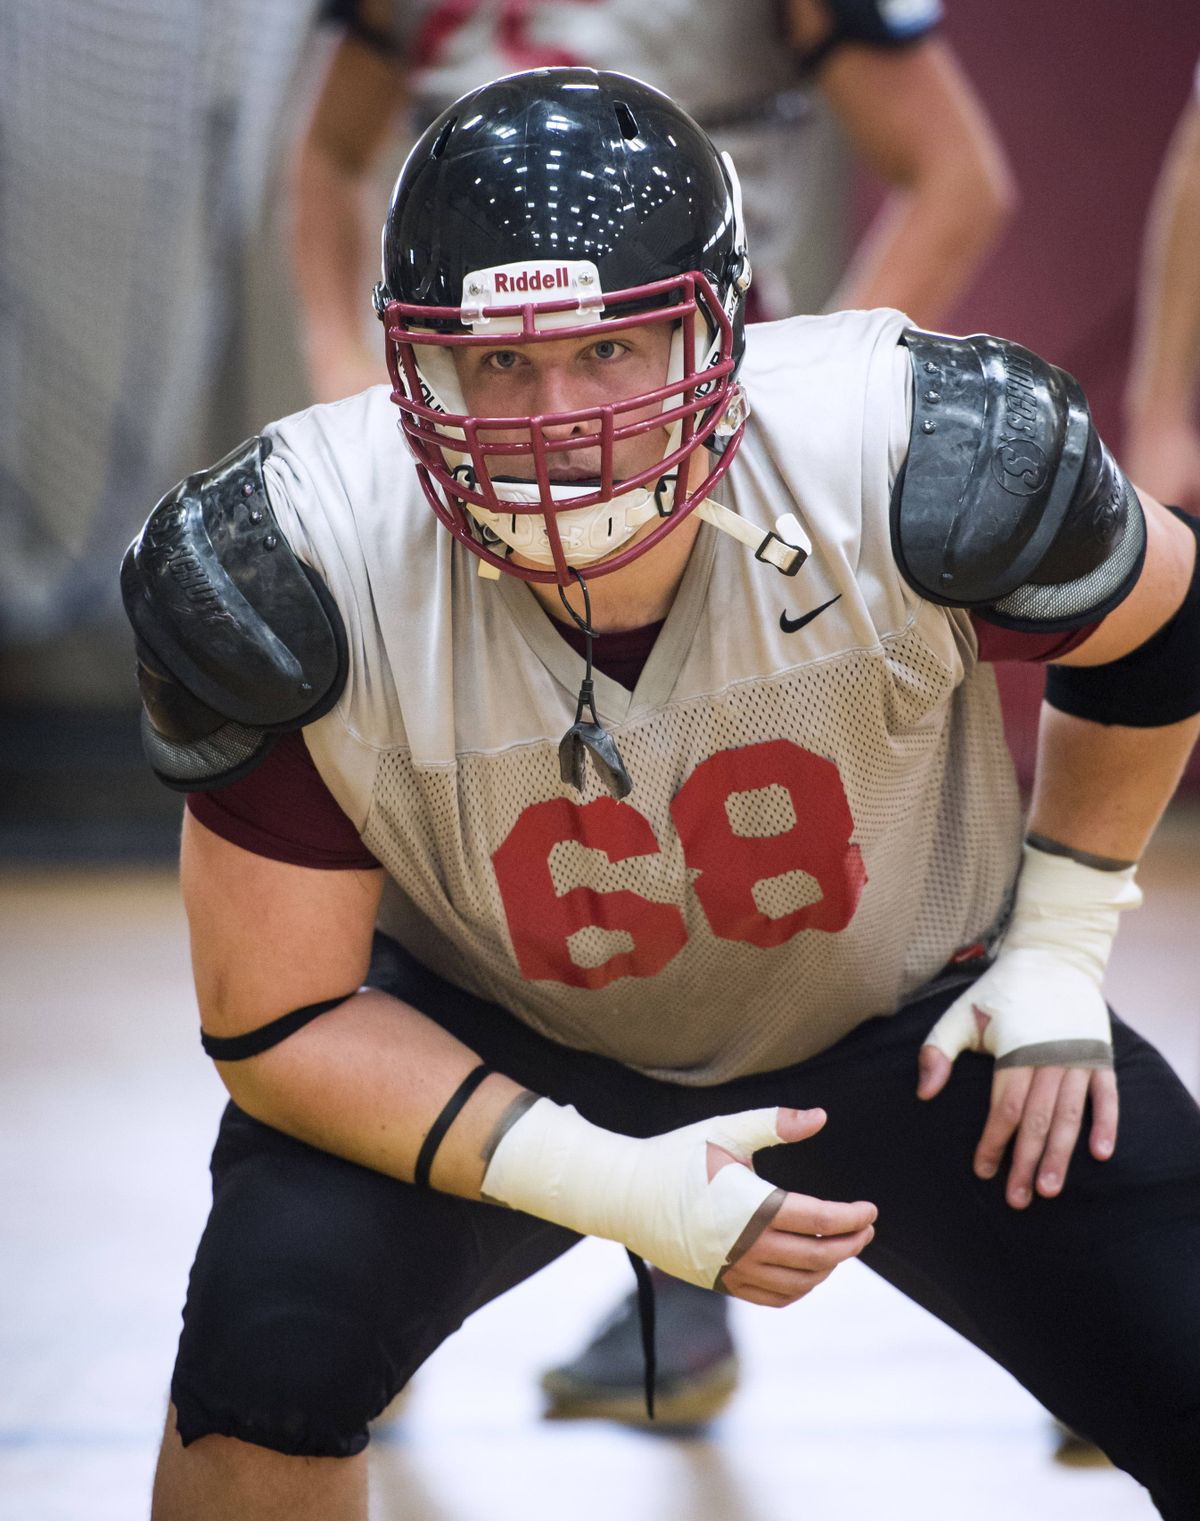 At 6-foot-7 and 310 pounds, University High graduate Kyle Cosby anchors the Whitworth offensive line. (COLIN MULVANY PHOTOS)